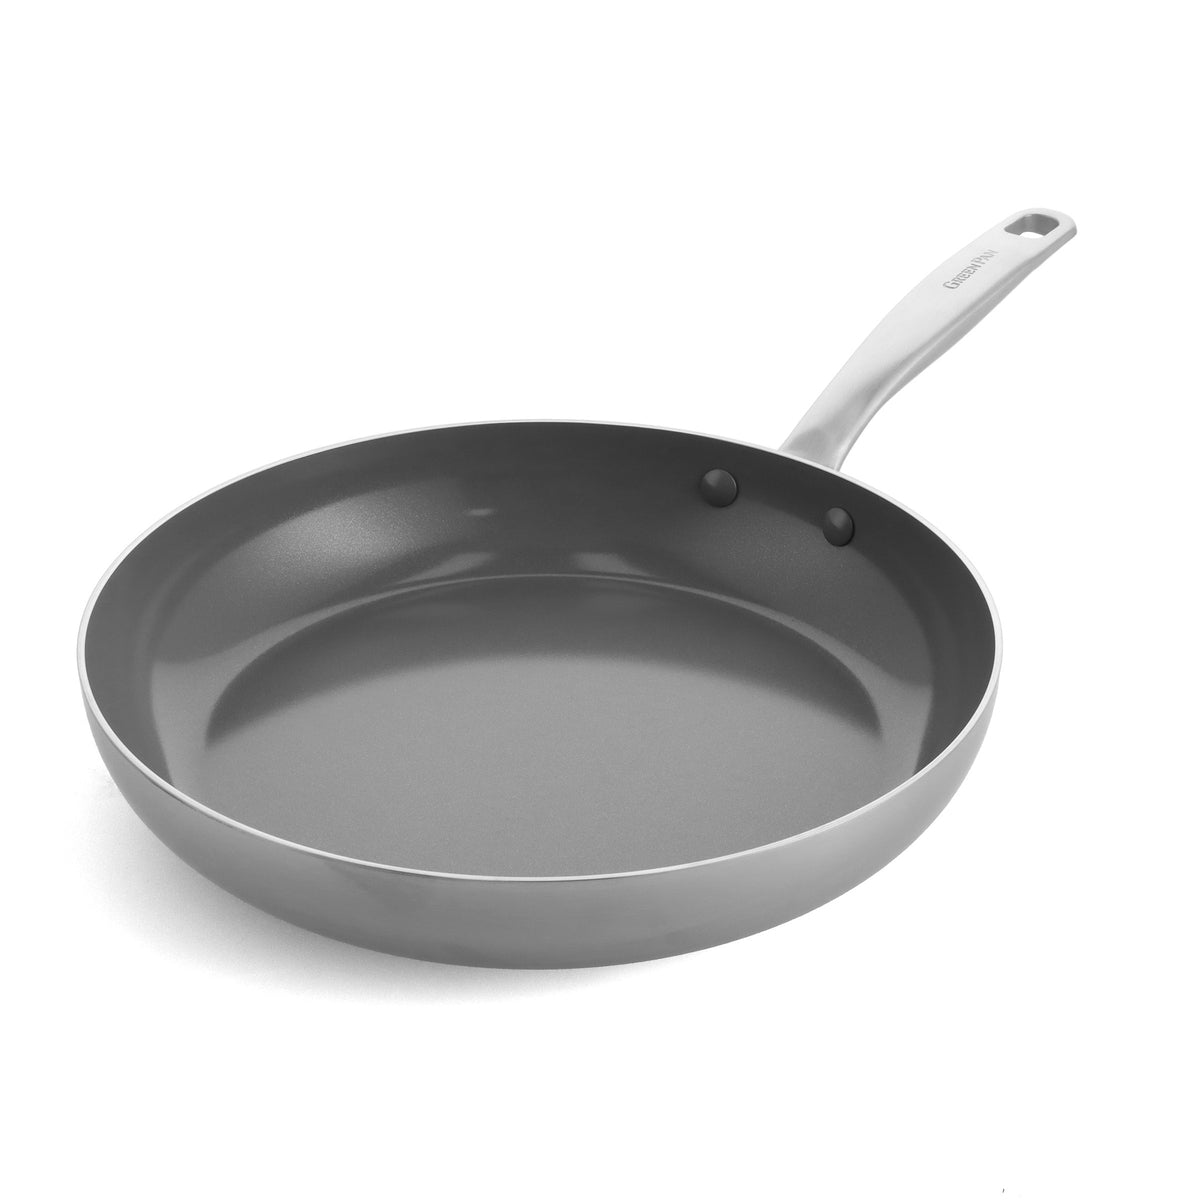 GreenPan™ Premiere Stainless-Steel Ceramic Nonstick 12 Covered Fry Pan